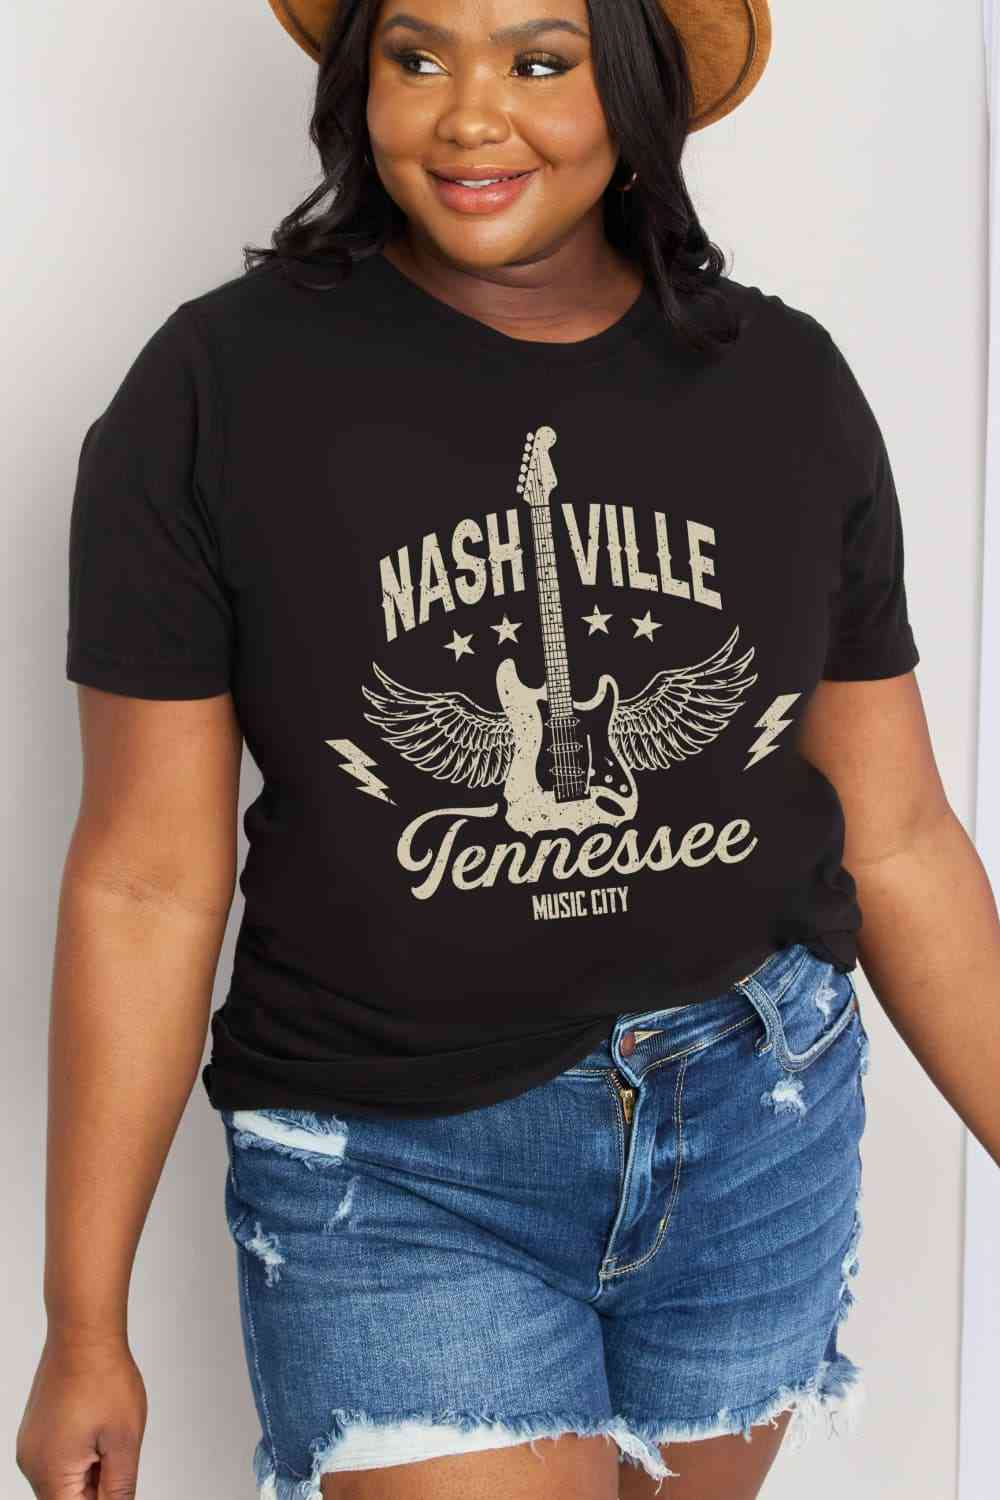 NASHVILLE TENNESSEE MUSIC CITY Graphic Cotton Tee - T-Shirts - Shirts & Tops - 10 - 2024